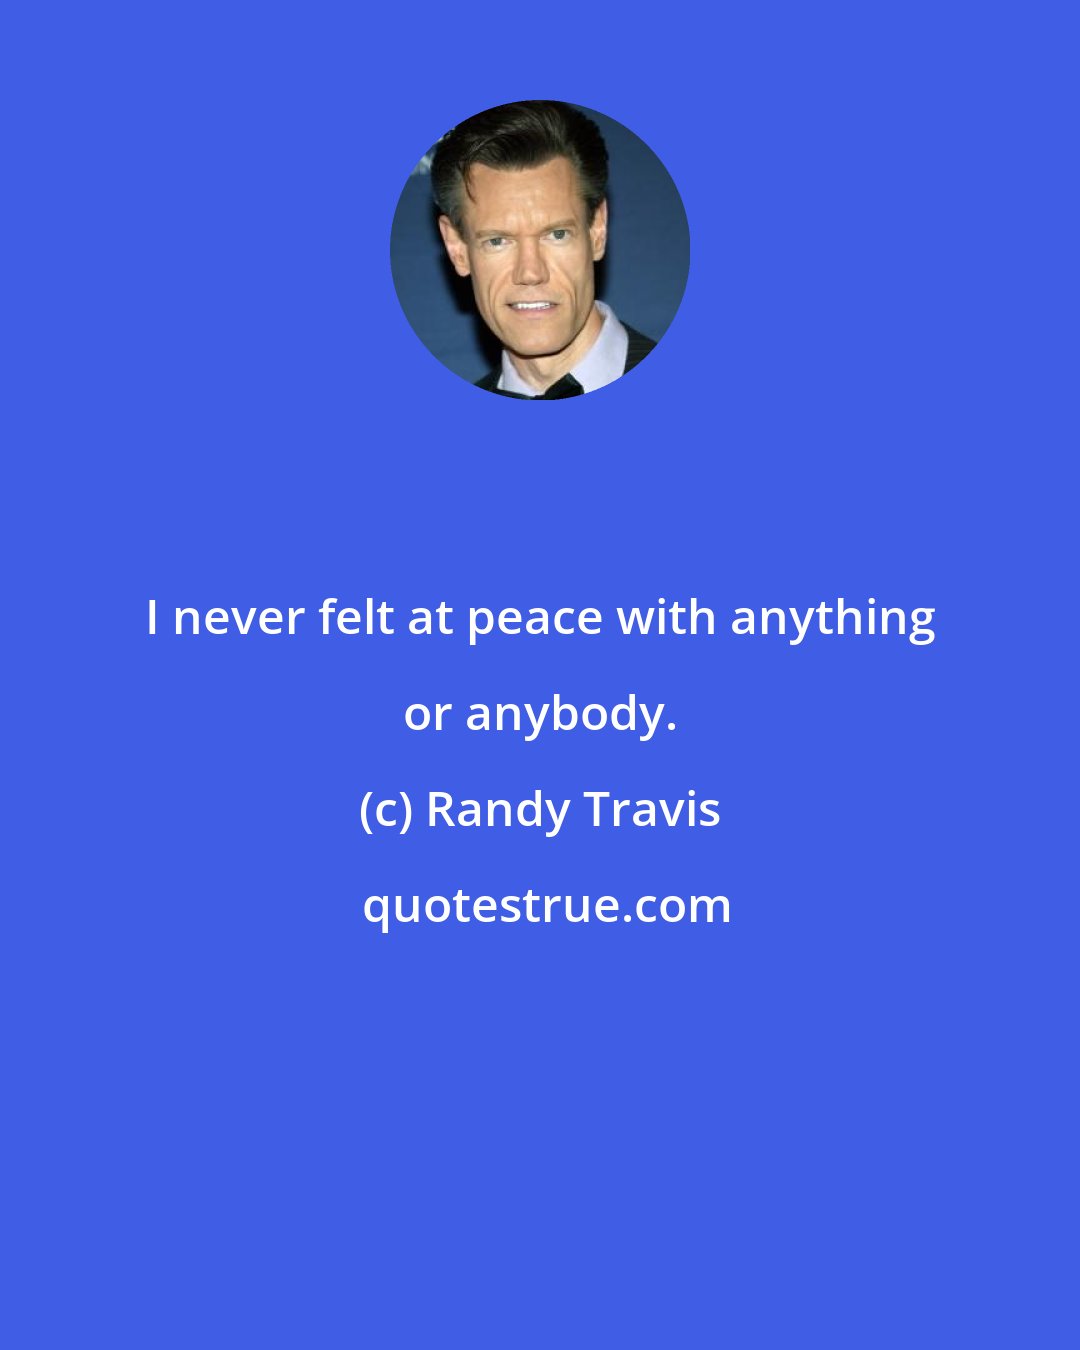 Randy Travis: I never felt at peace with anything or anybody.